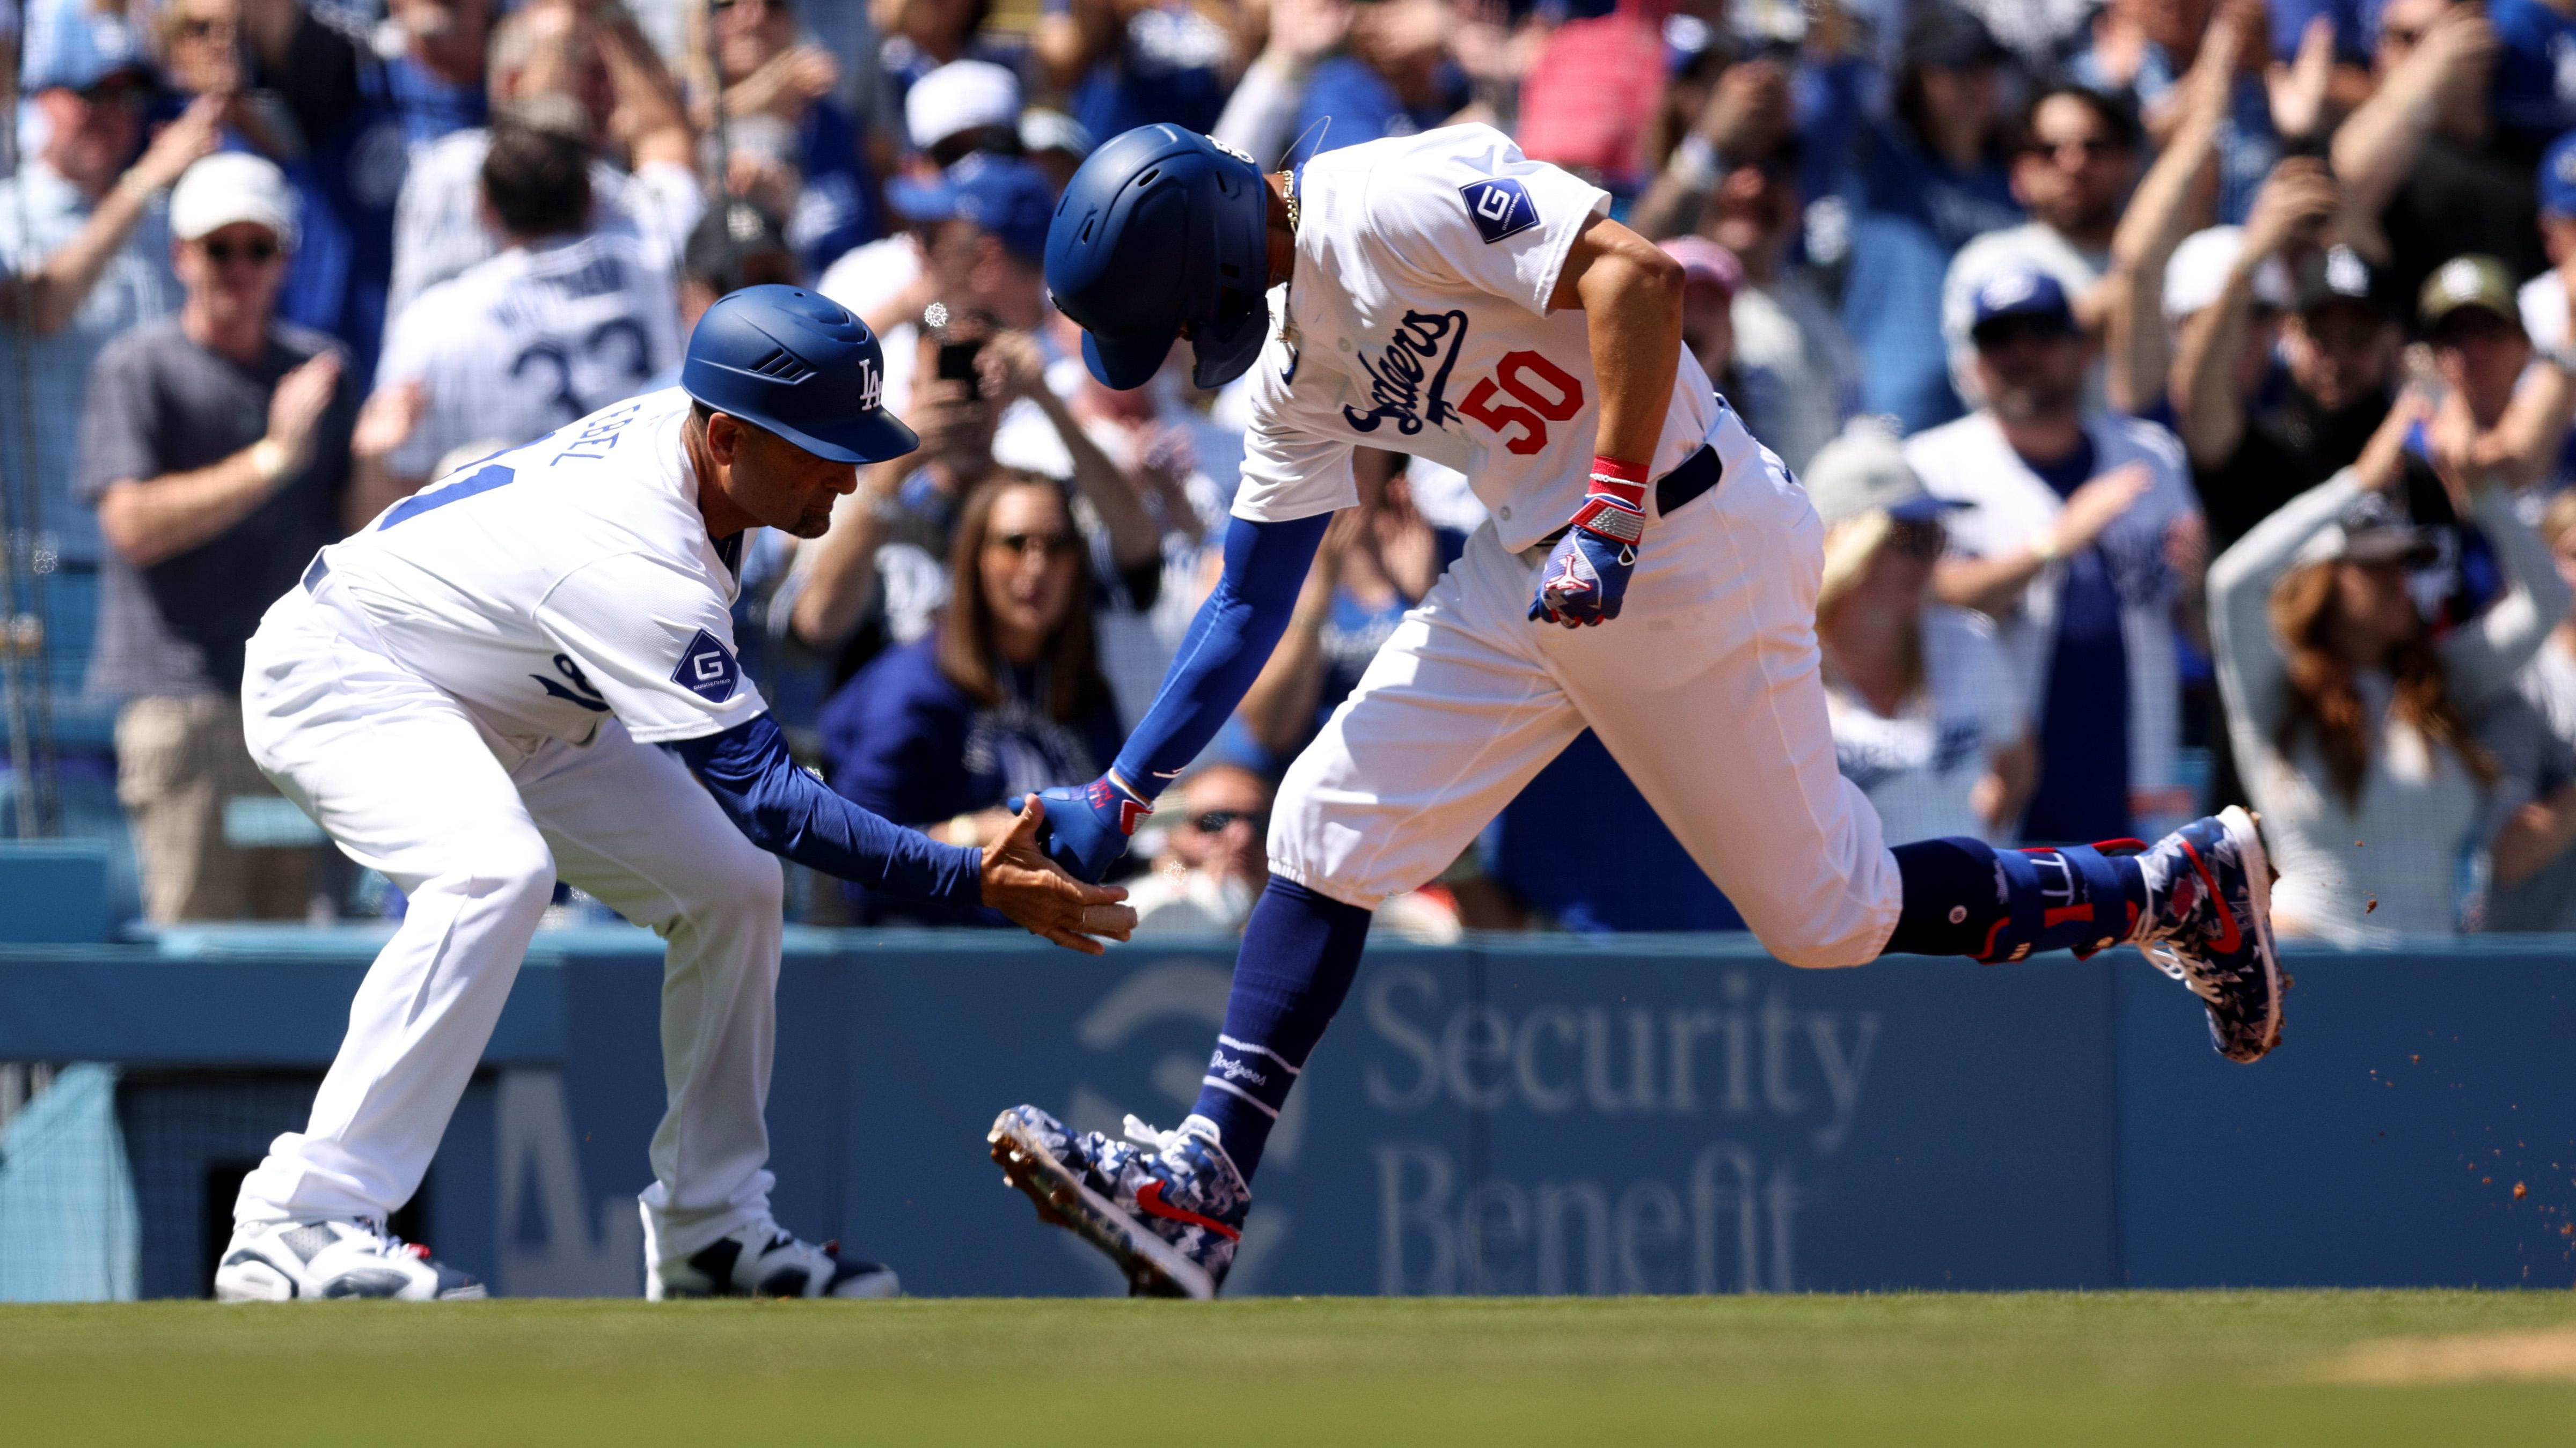 Los Angeles Dodgers outfielder Mookie Betts rounds third base after a home run.